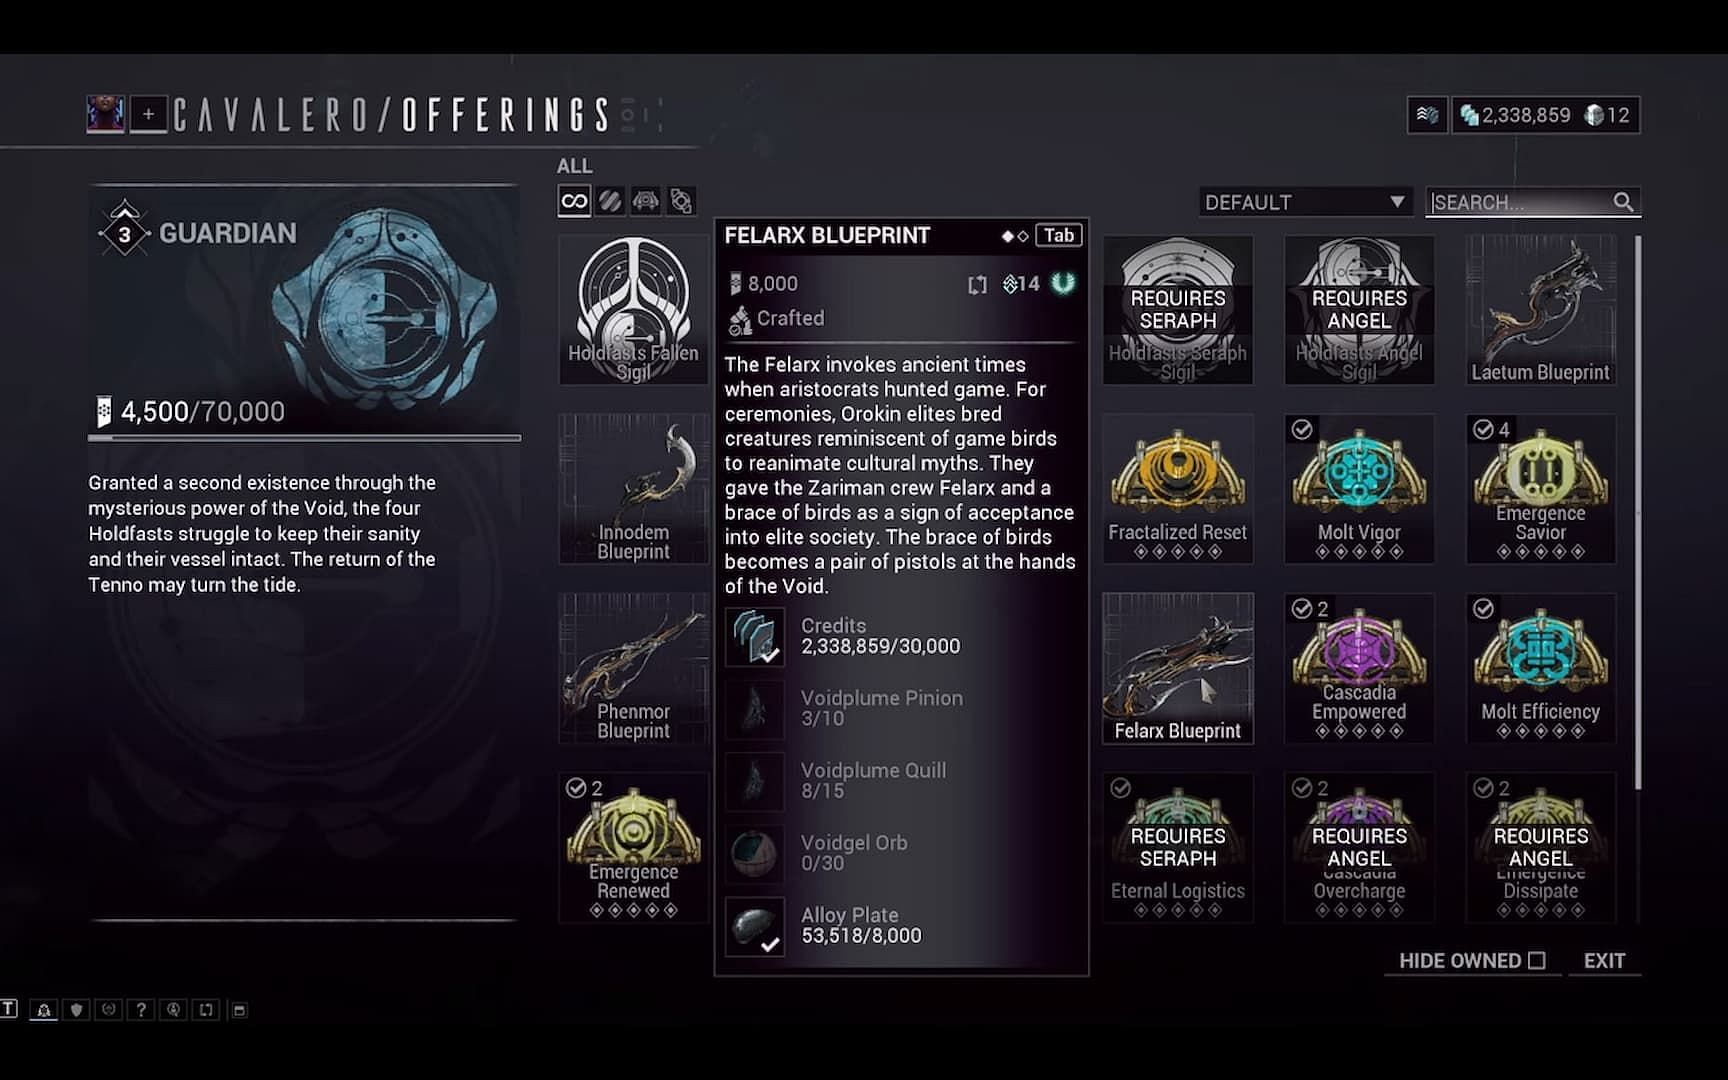 Warframe Felarx can be bought for 8,000 standings from Cavalero (Image via Digital Extremes)